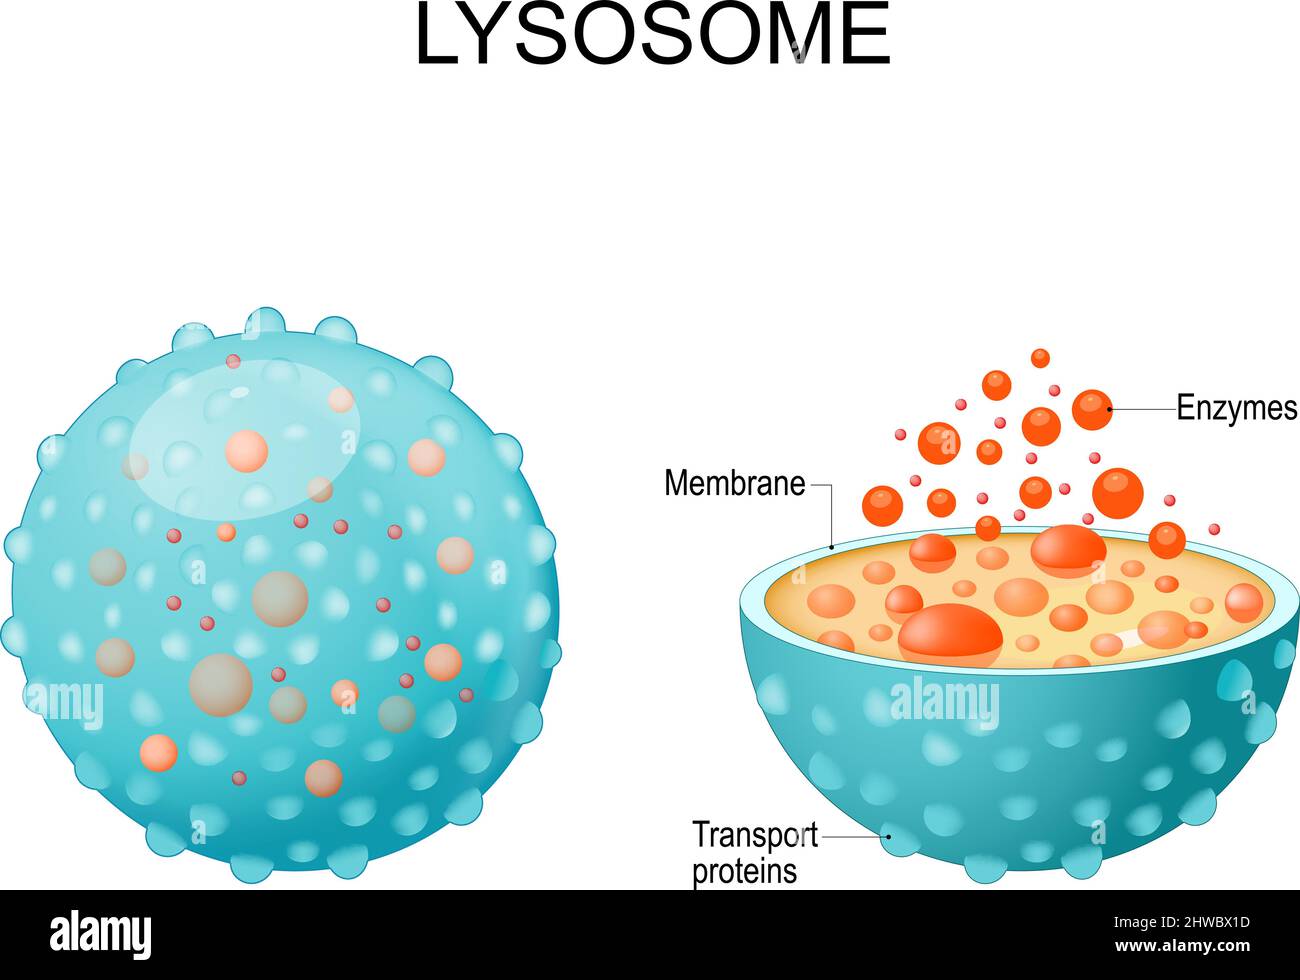 Lysosome. appearance, exterior and interior view. Cross section and Anatomy of the Lysosome: Hydrolytic enzymes, Membrane and transport proteins Stock Vector